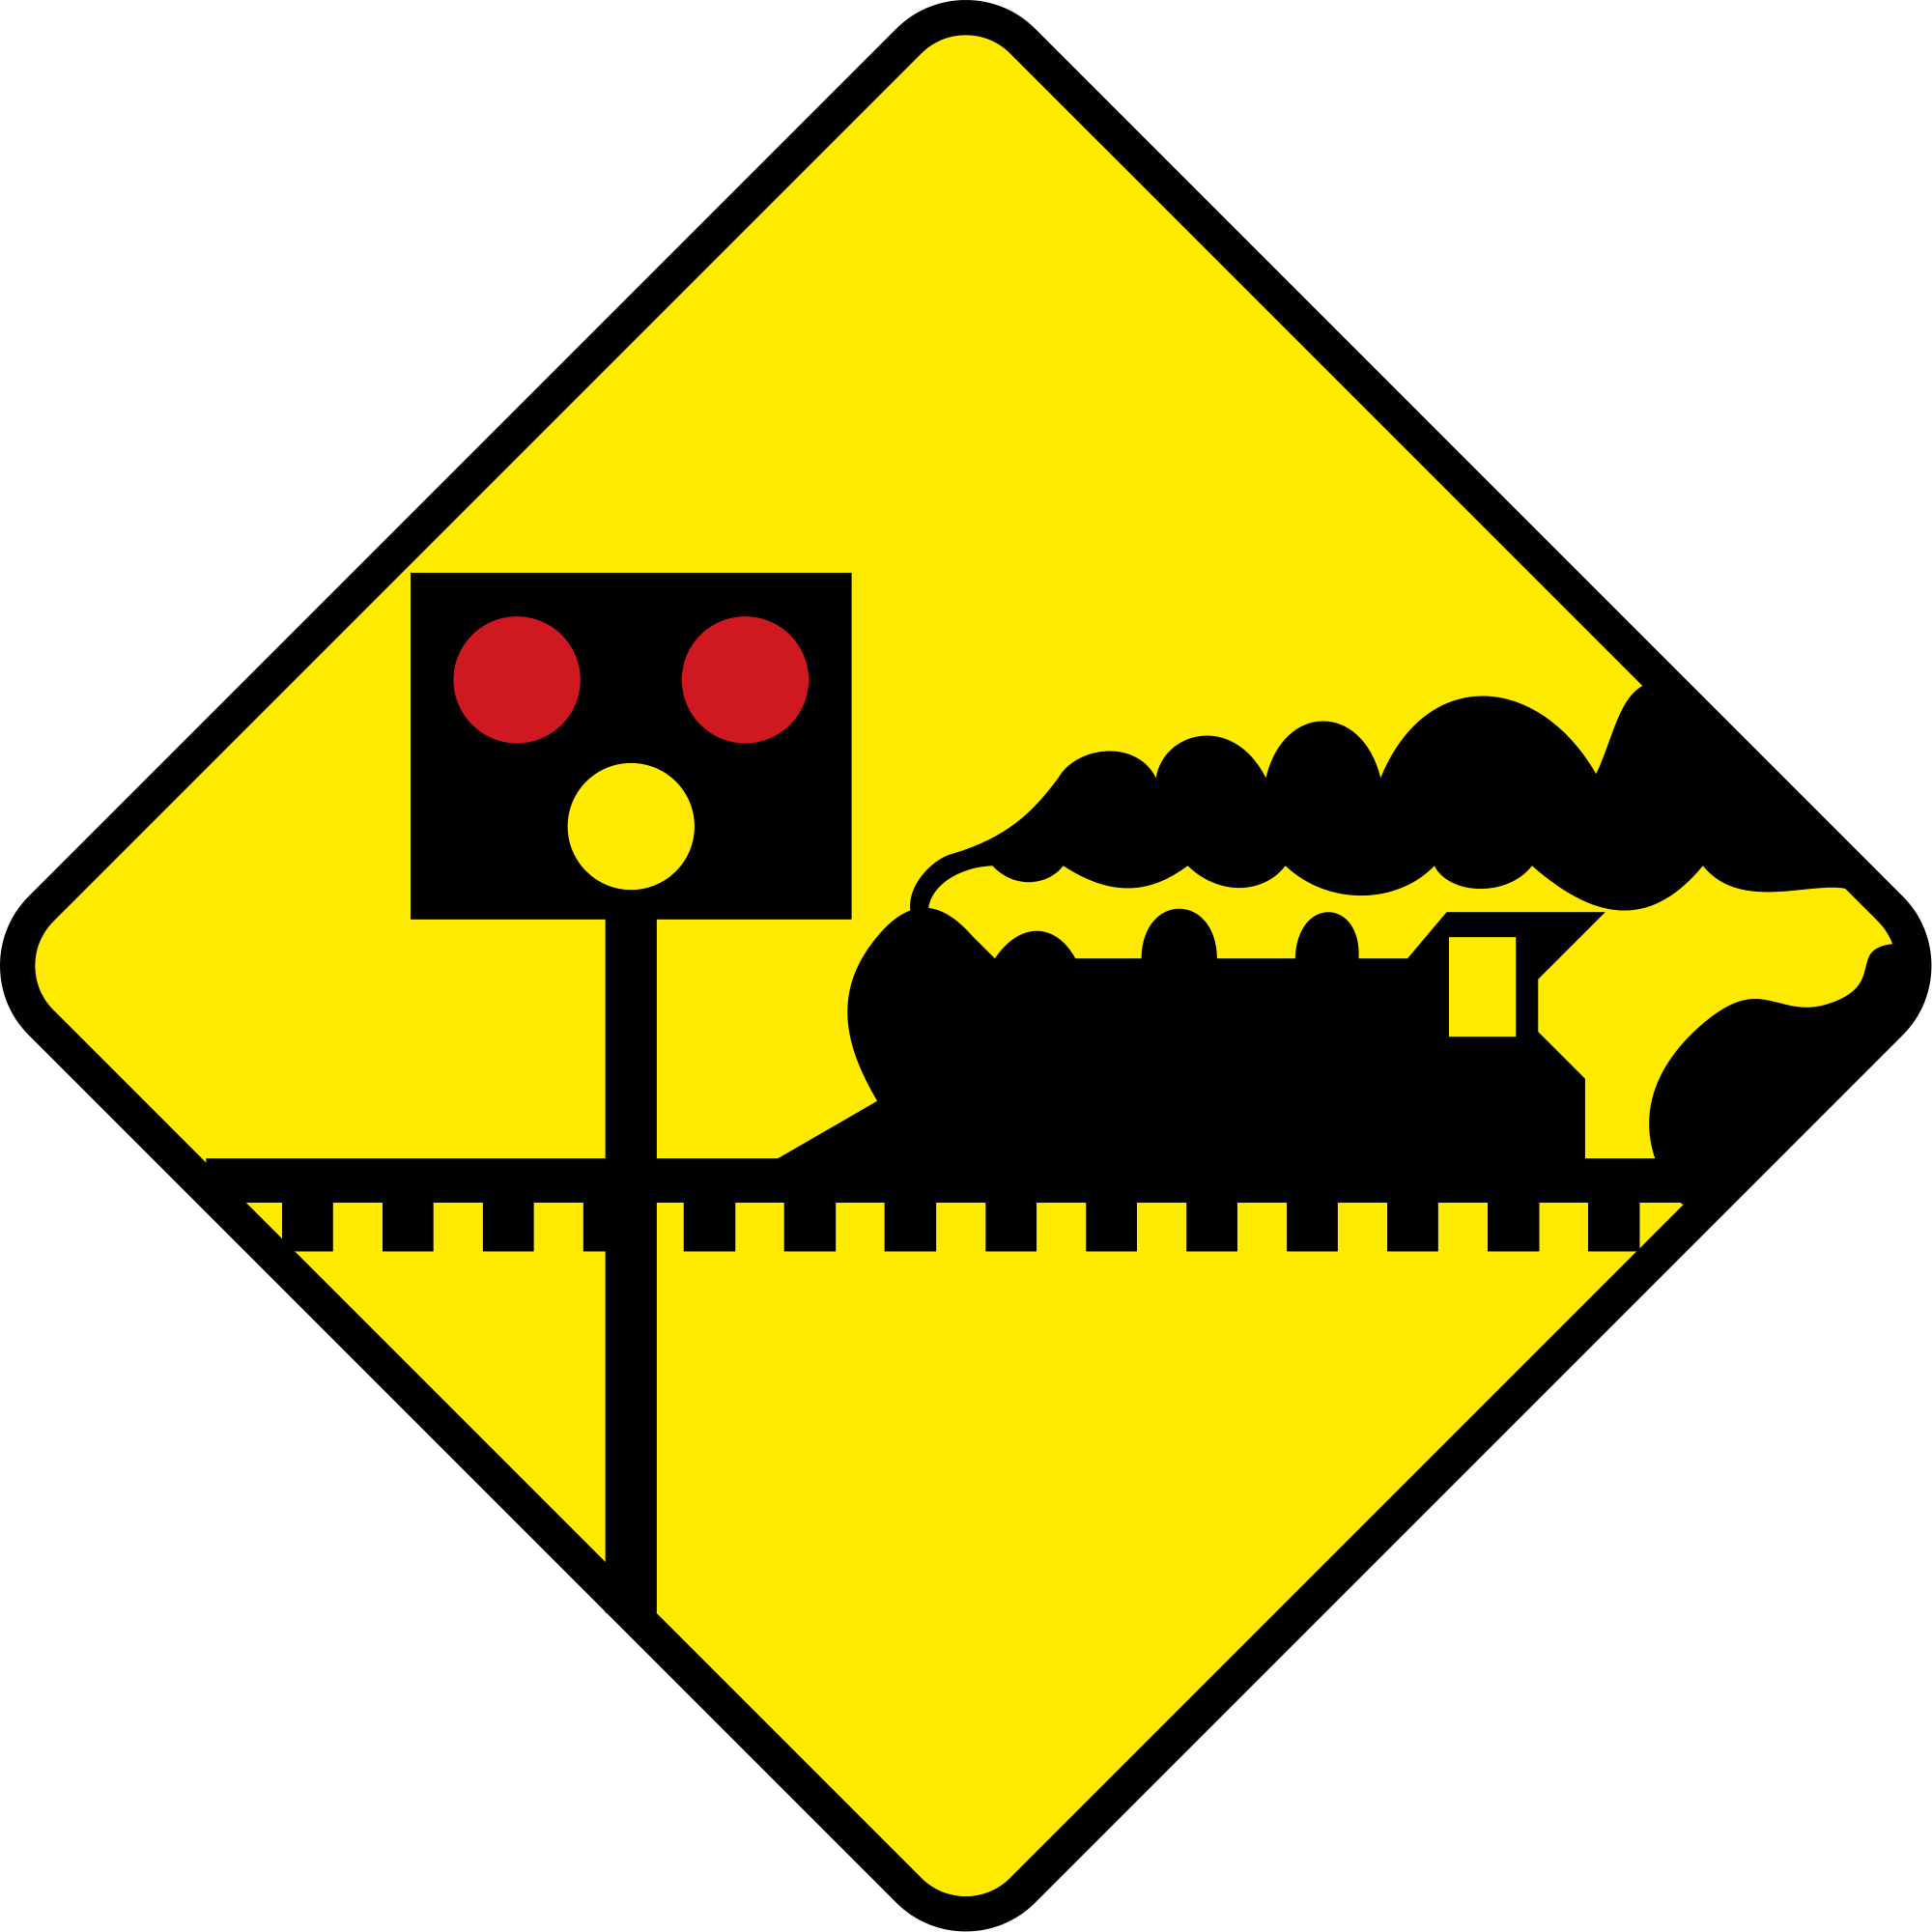 You Will Not Always Hear A Train's Horn - Road Signs In Jamaica (2000x2000)